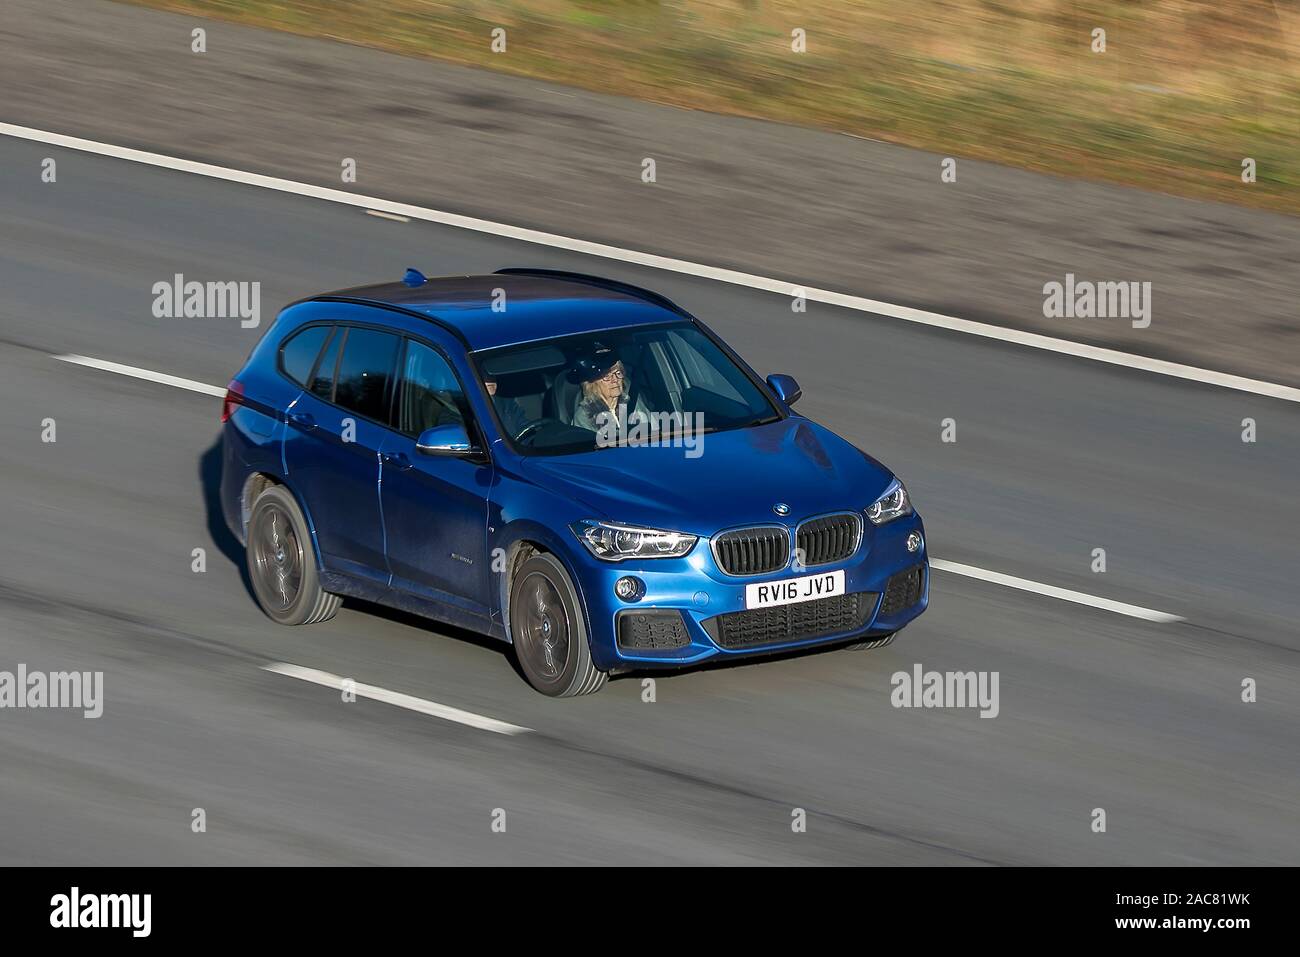 Blurred moving car 2016 BMW X1 Xdrive20d M Sport Aut traveling at speed on the M61 motorway Slow camera shutter speed vehicle movement Stock Photo